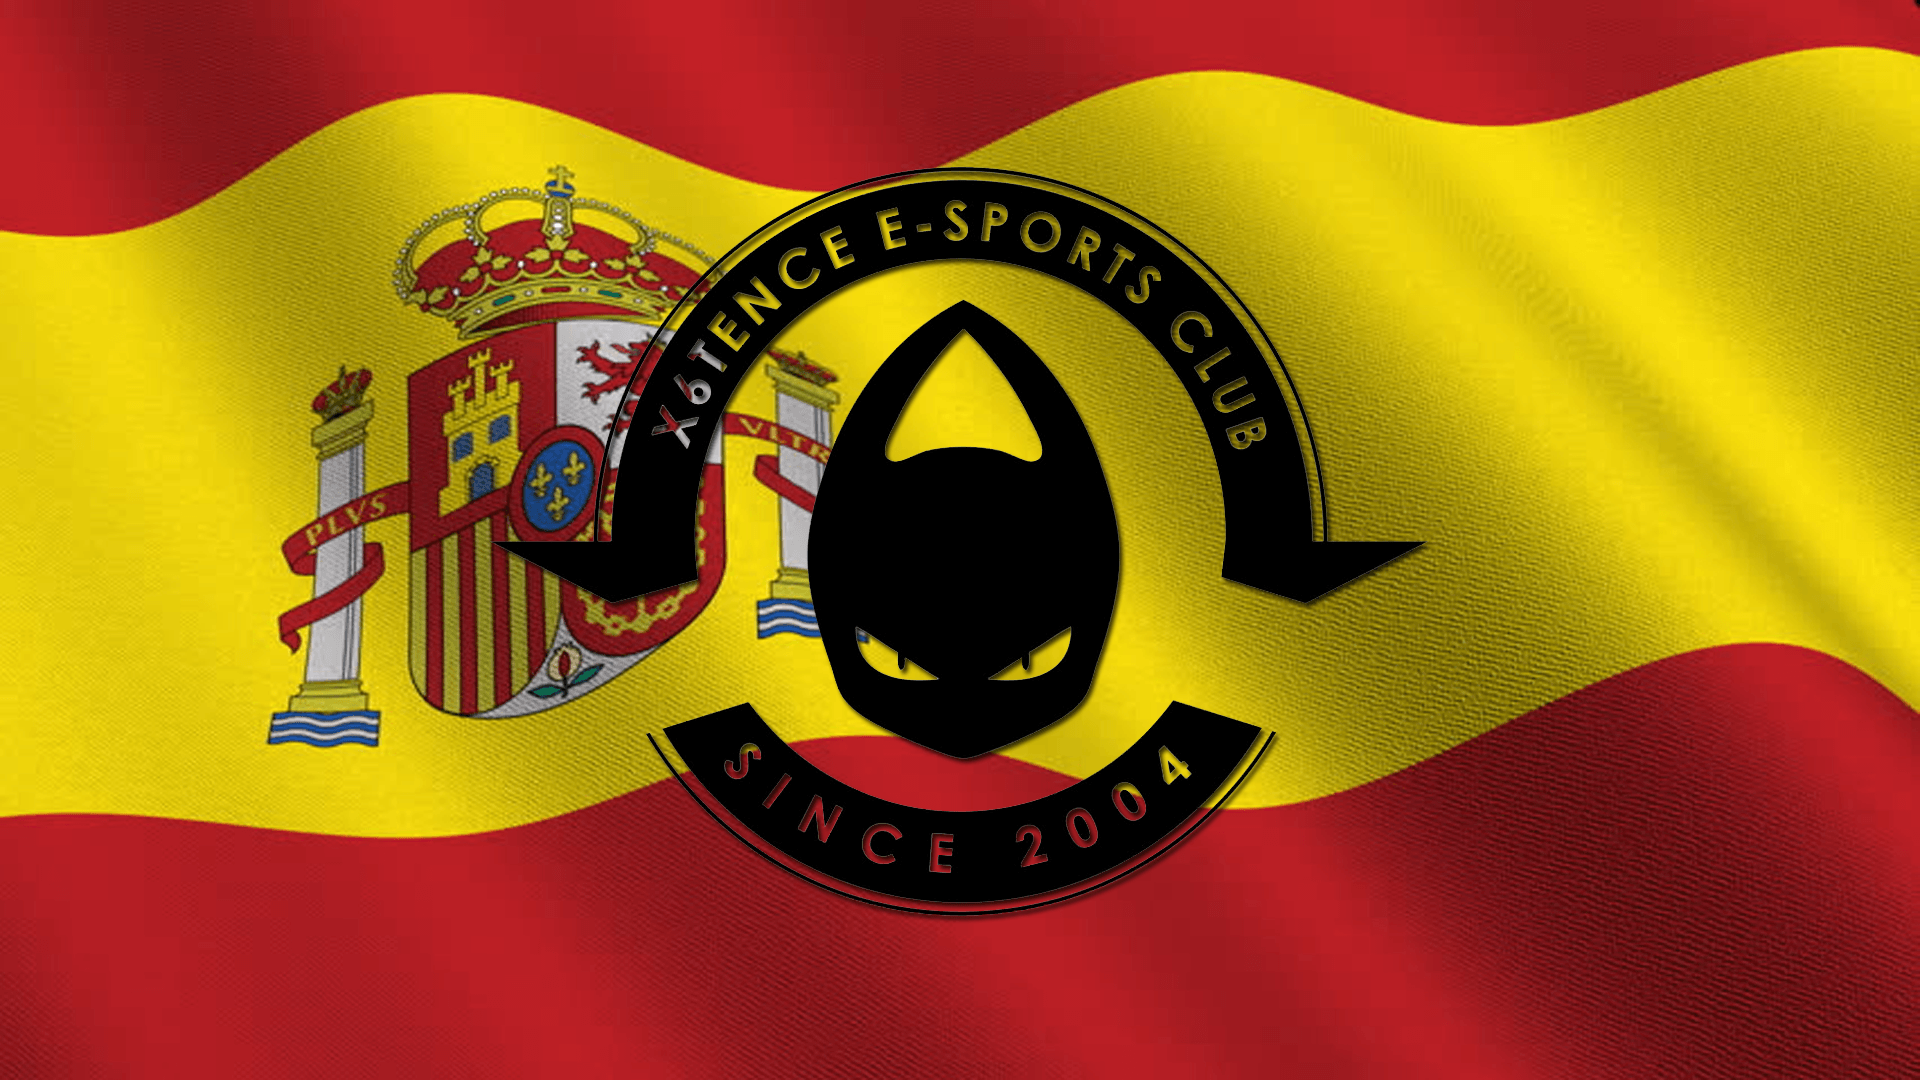 x6tence spain flag. CS:GO Wallpaper and Background